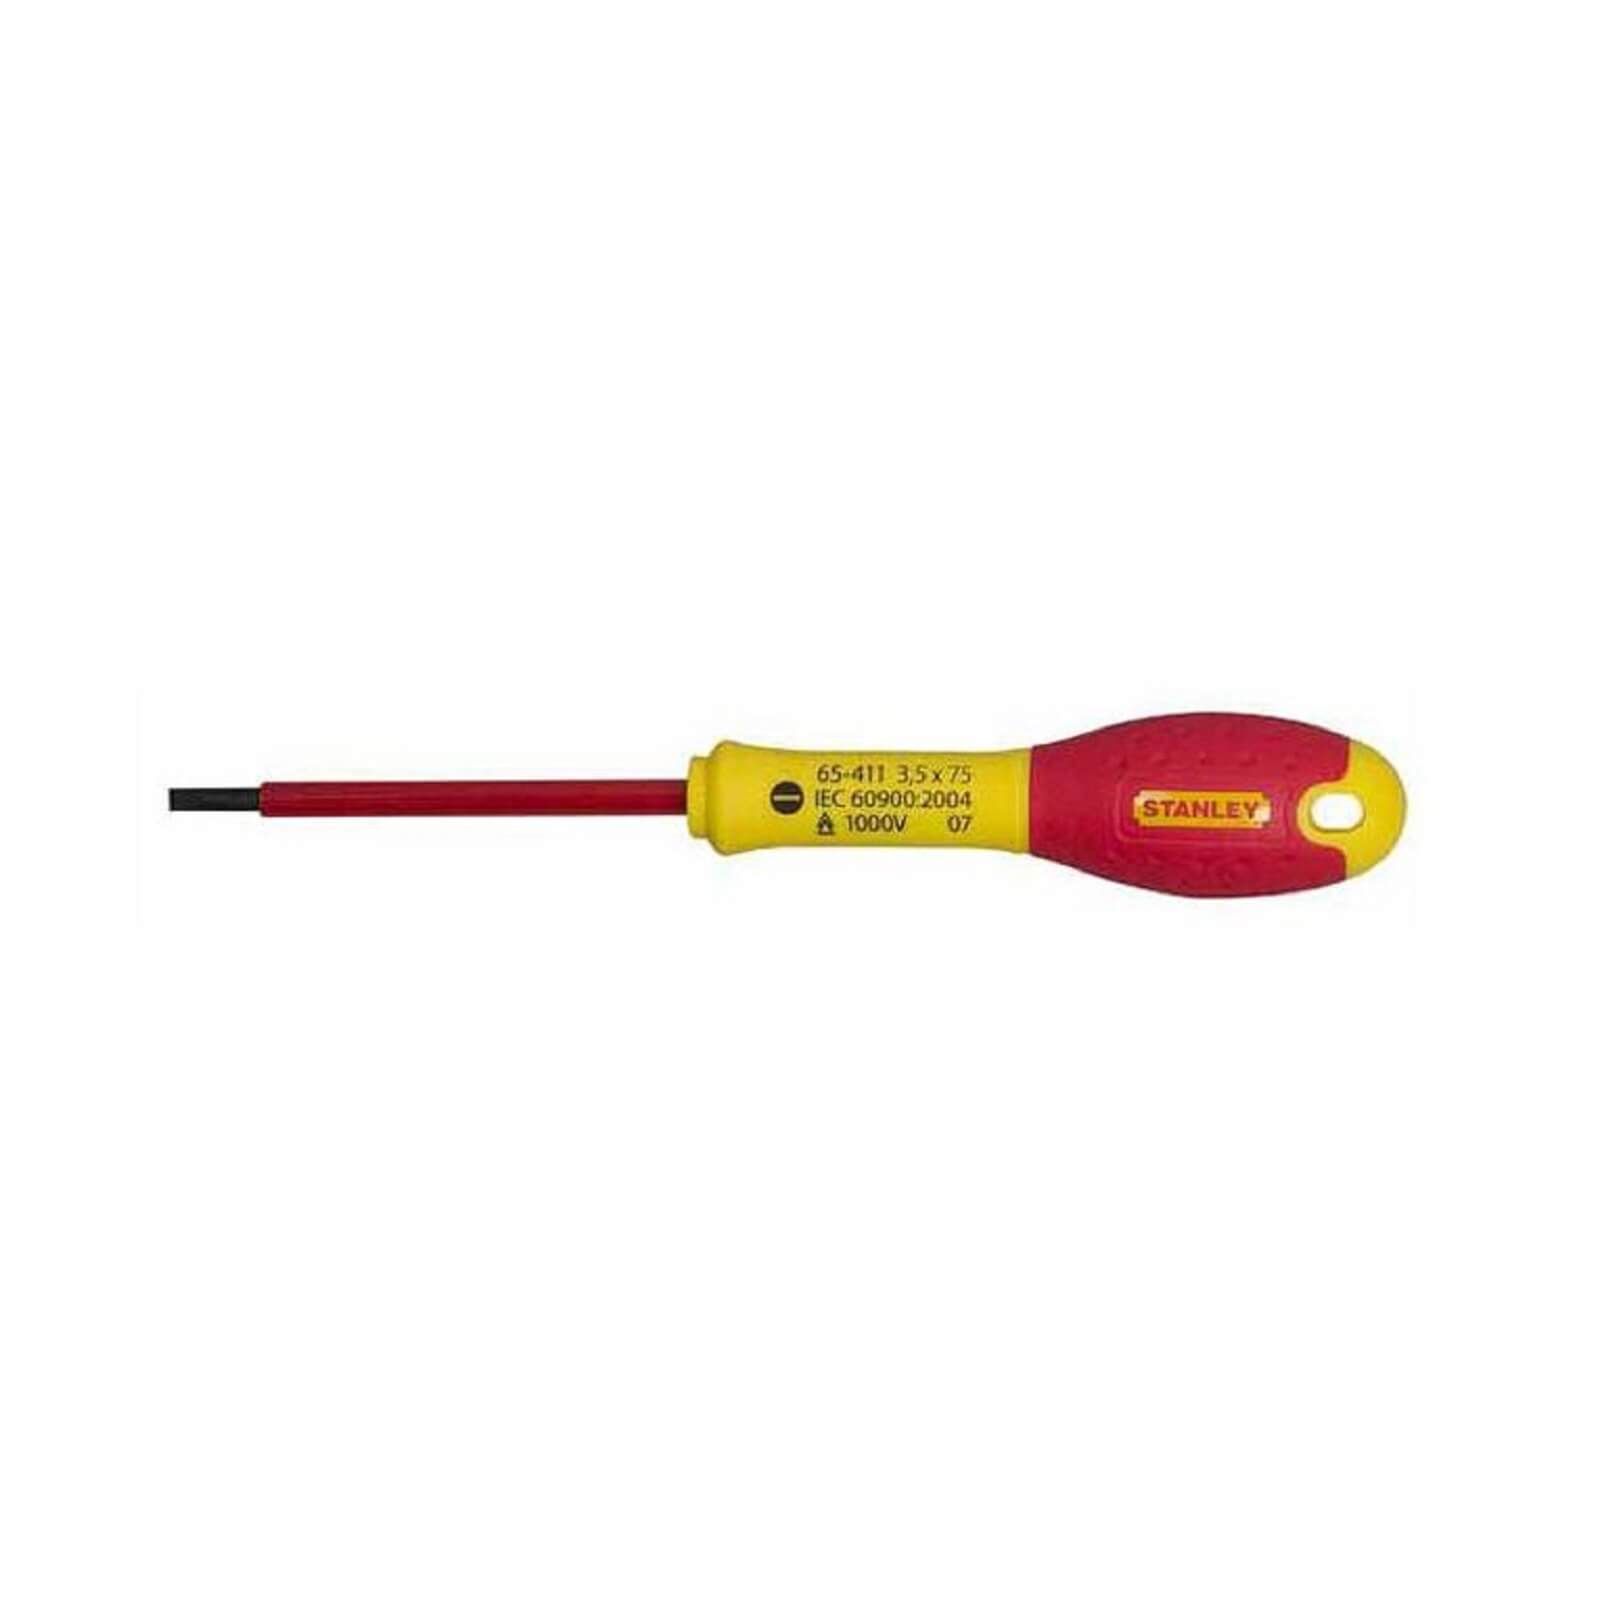 Stanley Fatmax Slotted Insulated Screwdriver - 4x100mm